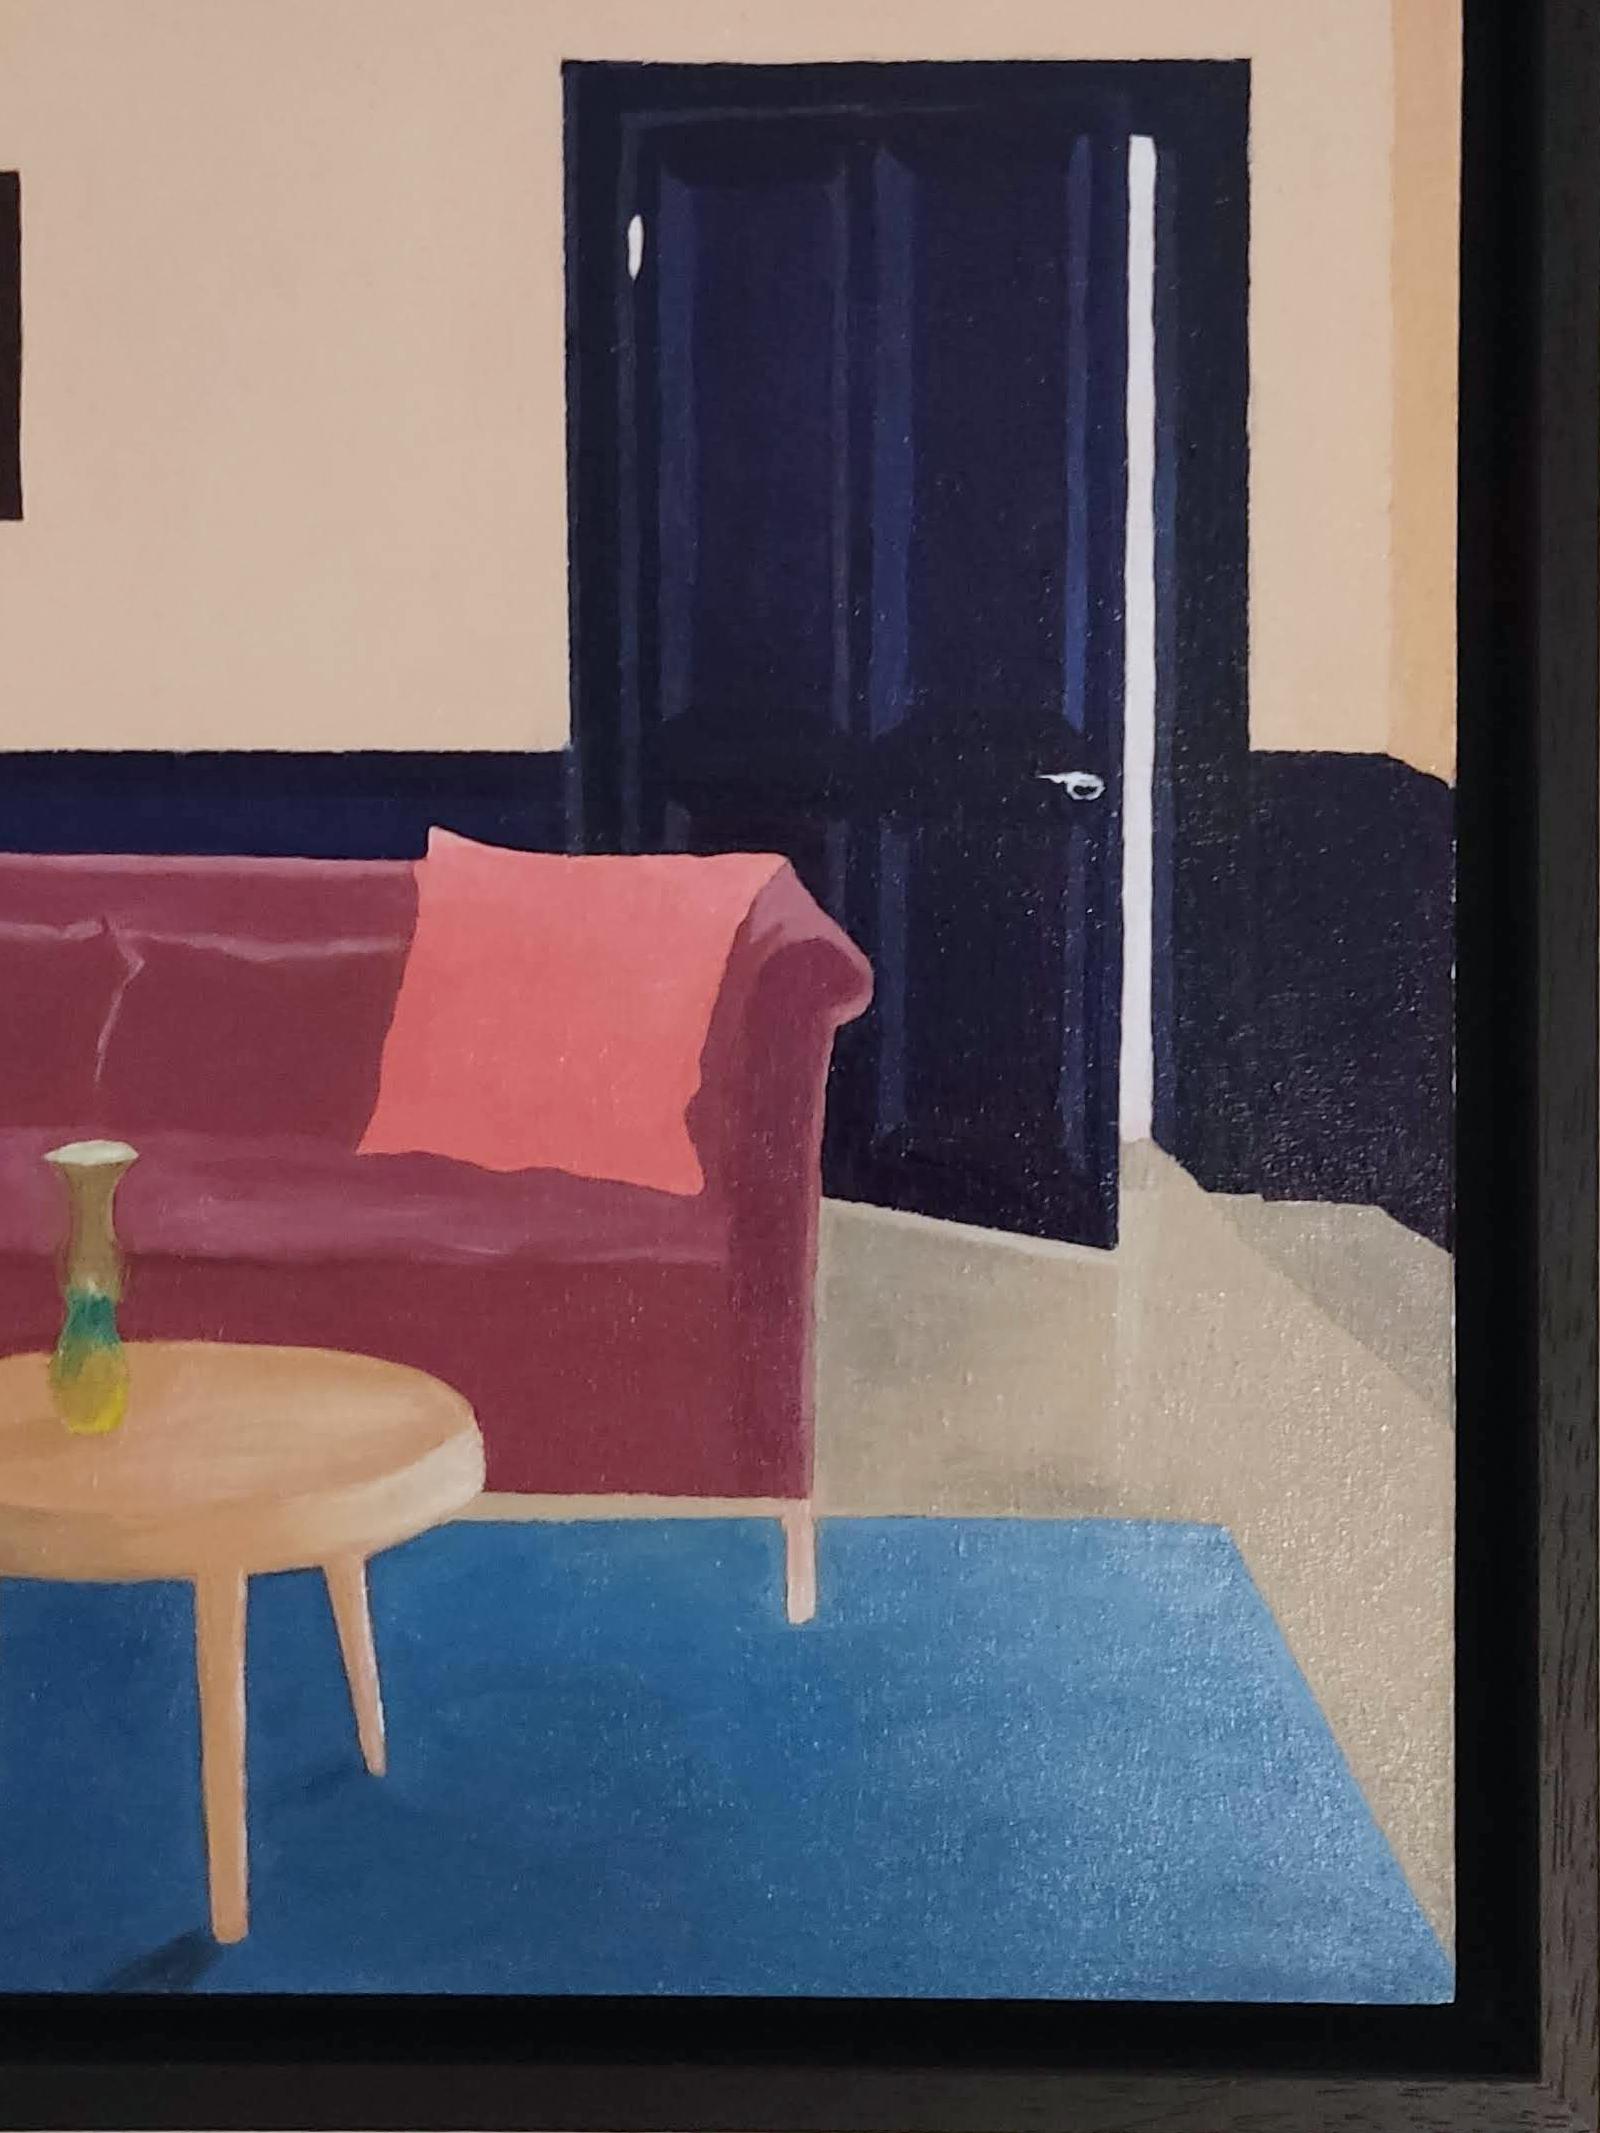 Oil Painting on coated Wood panel - Contemporary Interior, Oil Painting, Vase, Interior, sofa, Jean Arp

Work Title : Un après midi avec Arp (EN : An afternoon with Arp)
Artist : Gabriel Riesnert (French artist, Born in 1970, lives and works in